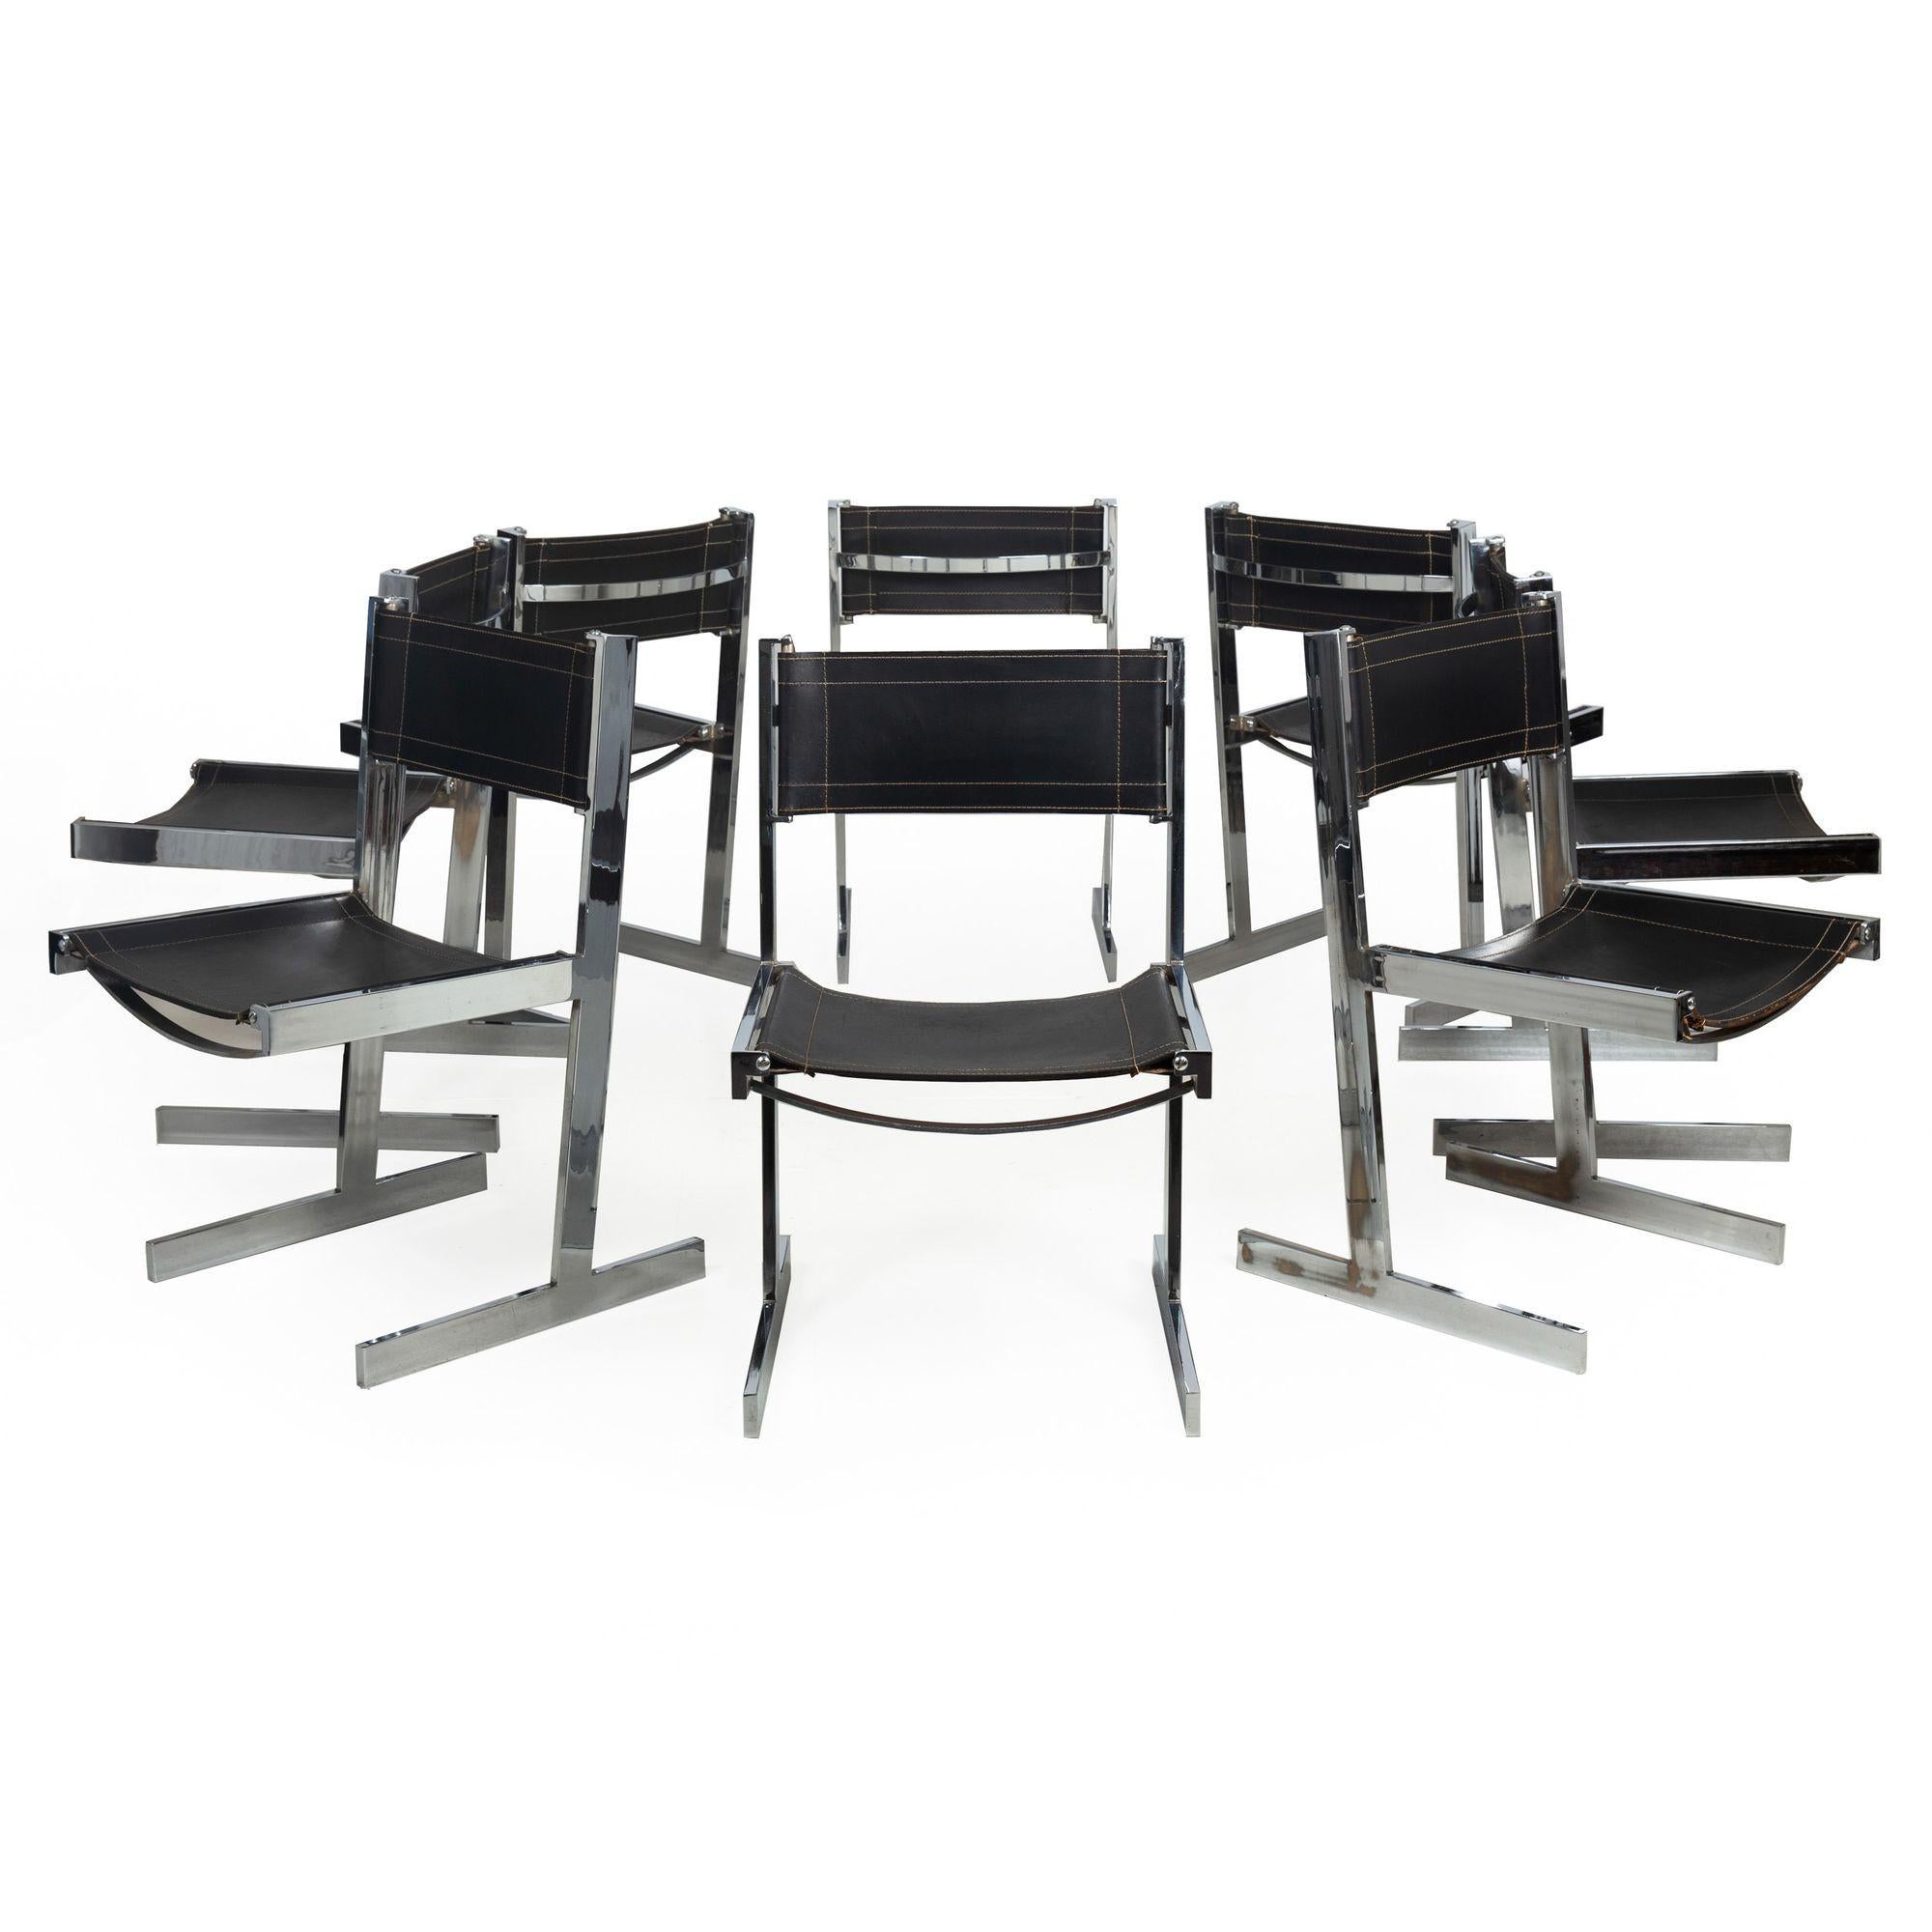 RARE SET OF EIGHT BRITISH MODERNIST STITCHED-LEATHER AND CHROMED STEEL DINING CHAIRS
Richard Young for Merrow Associates, United Kingdom, circa 1980  unmarked
Item # 307HXK27A

A rare angular and very compelling set of chromed steel dining chairs